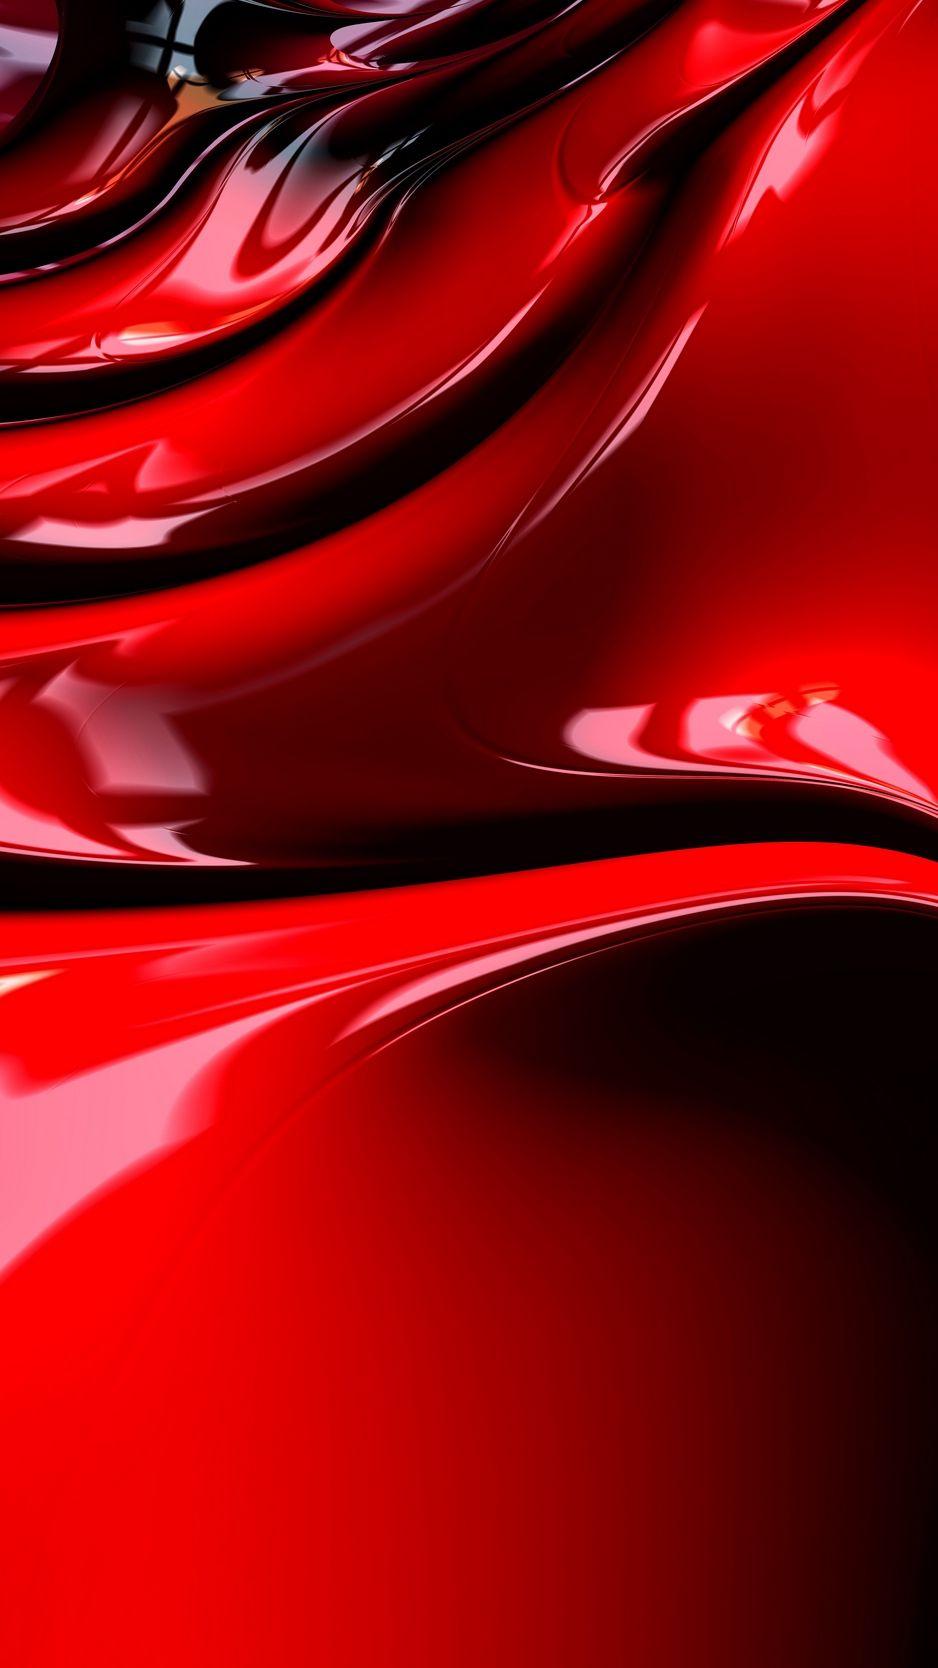 iPhone 8 Red Wallpapers - Top Free ...